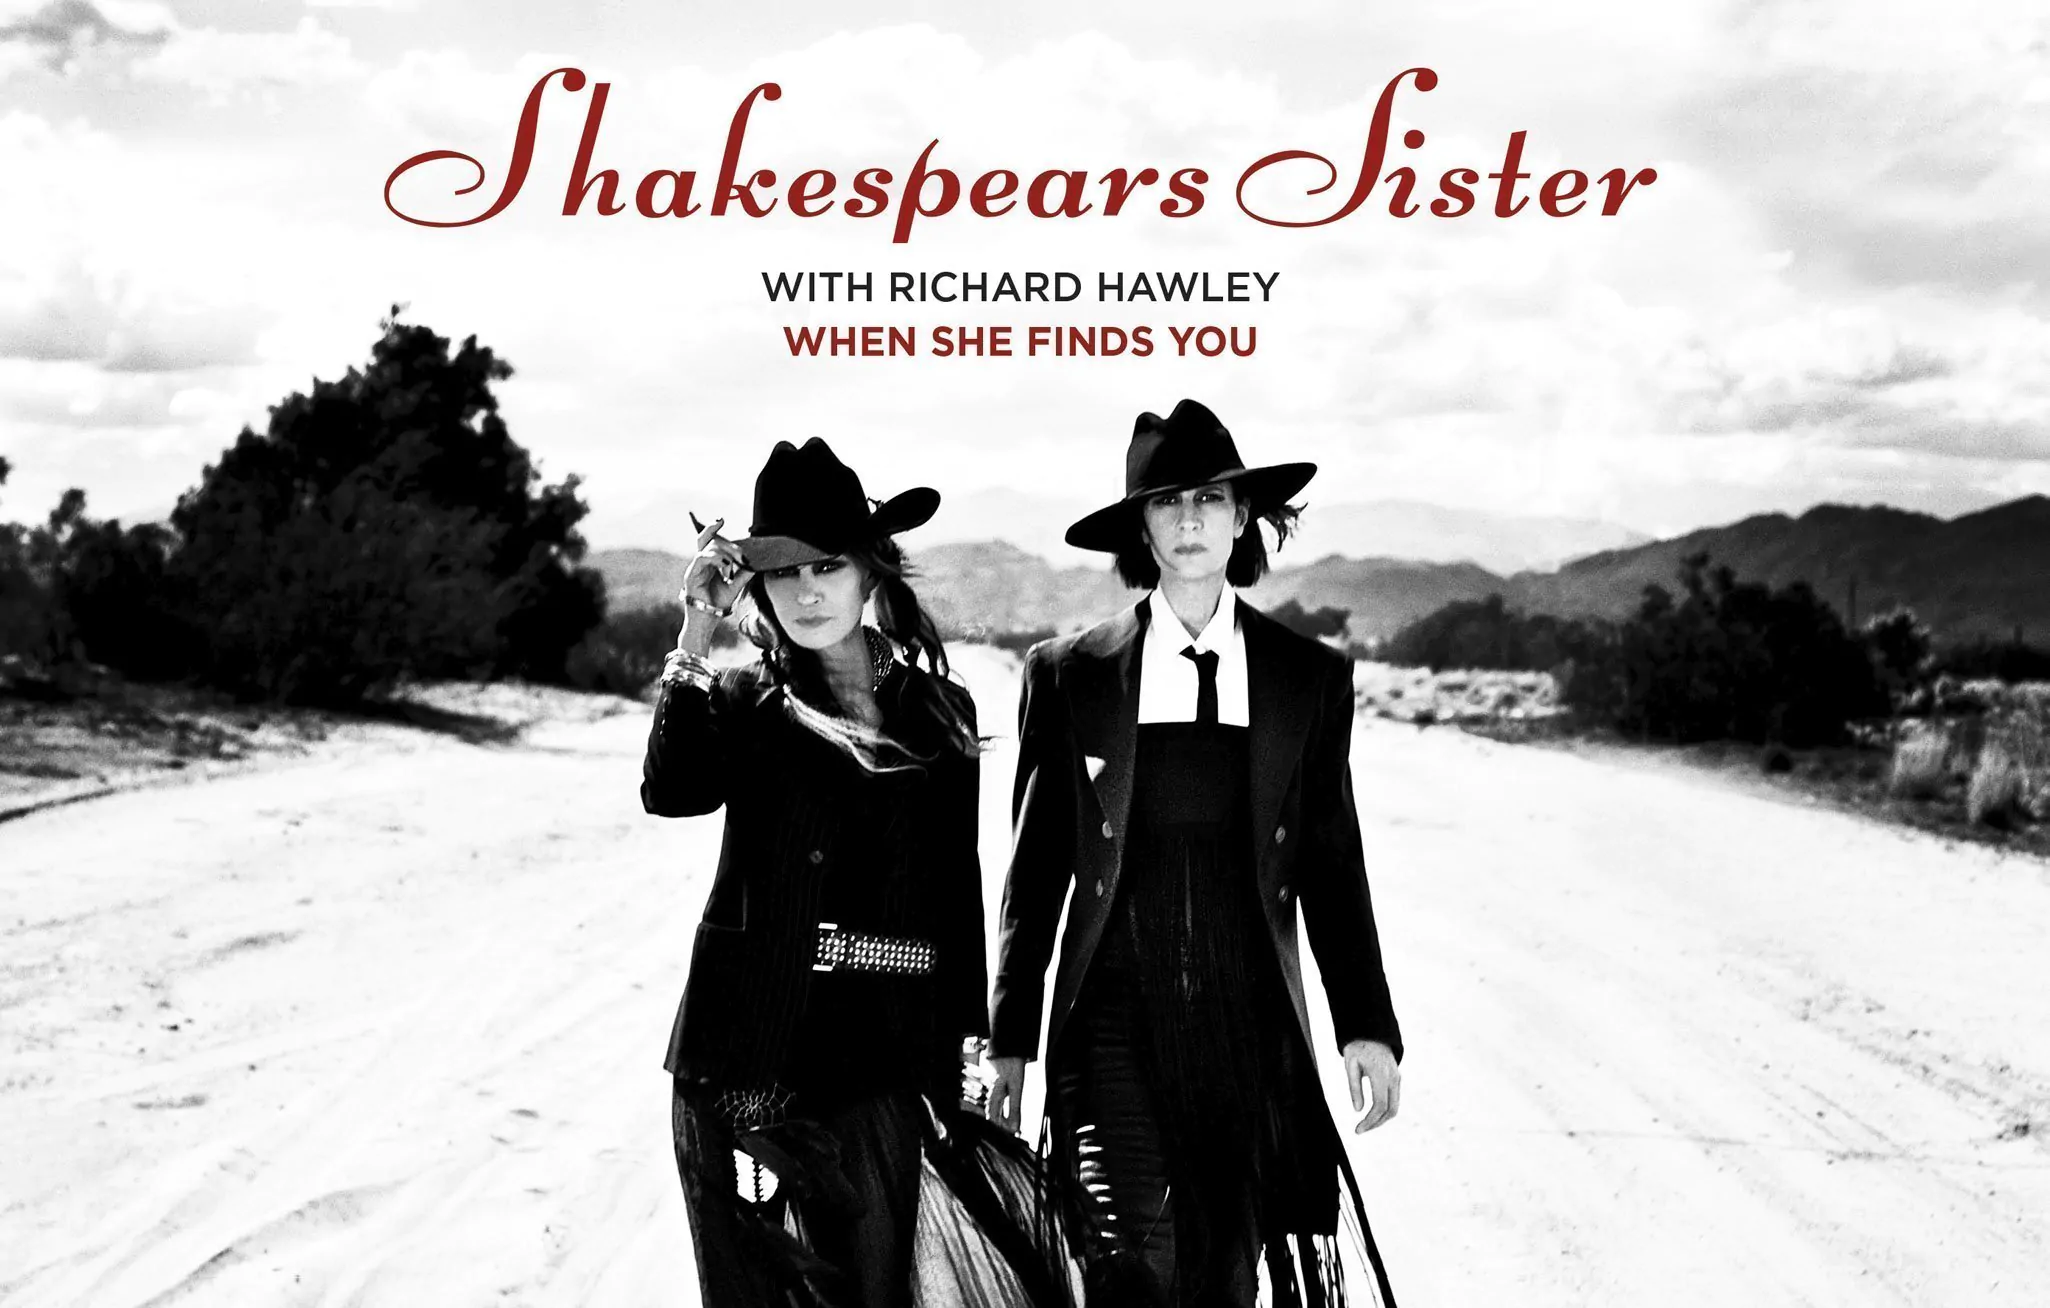 SHAKESPEARS SISTER announce new EP & share new single ‘When She Finds You’ feat Richard Hawley